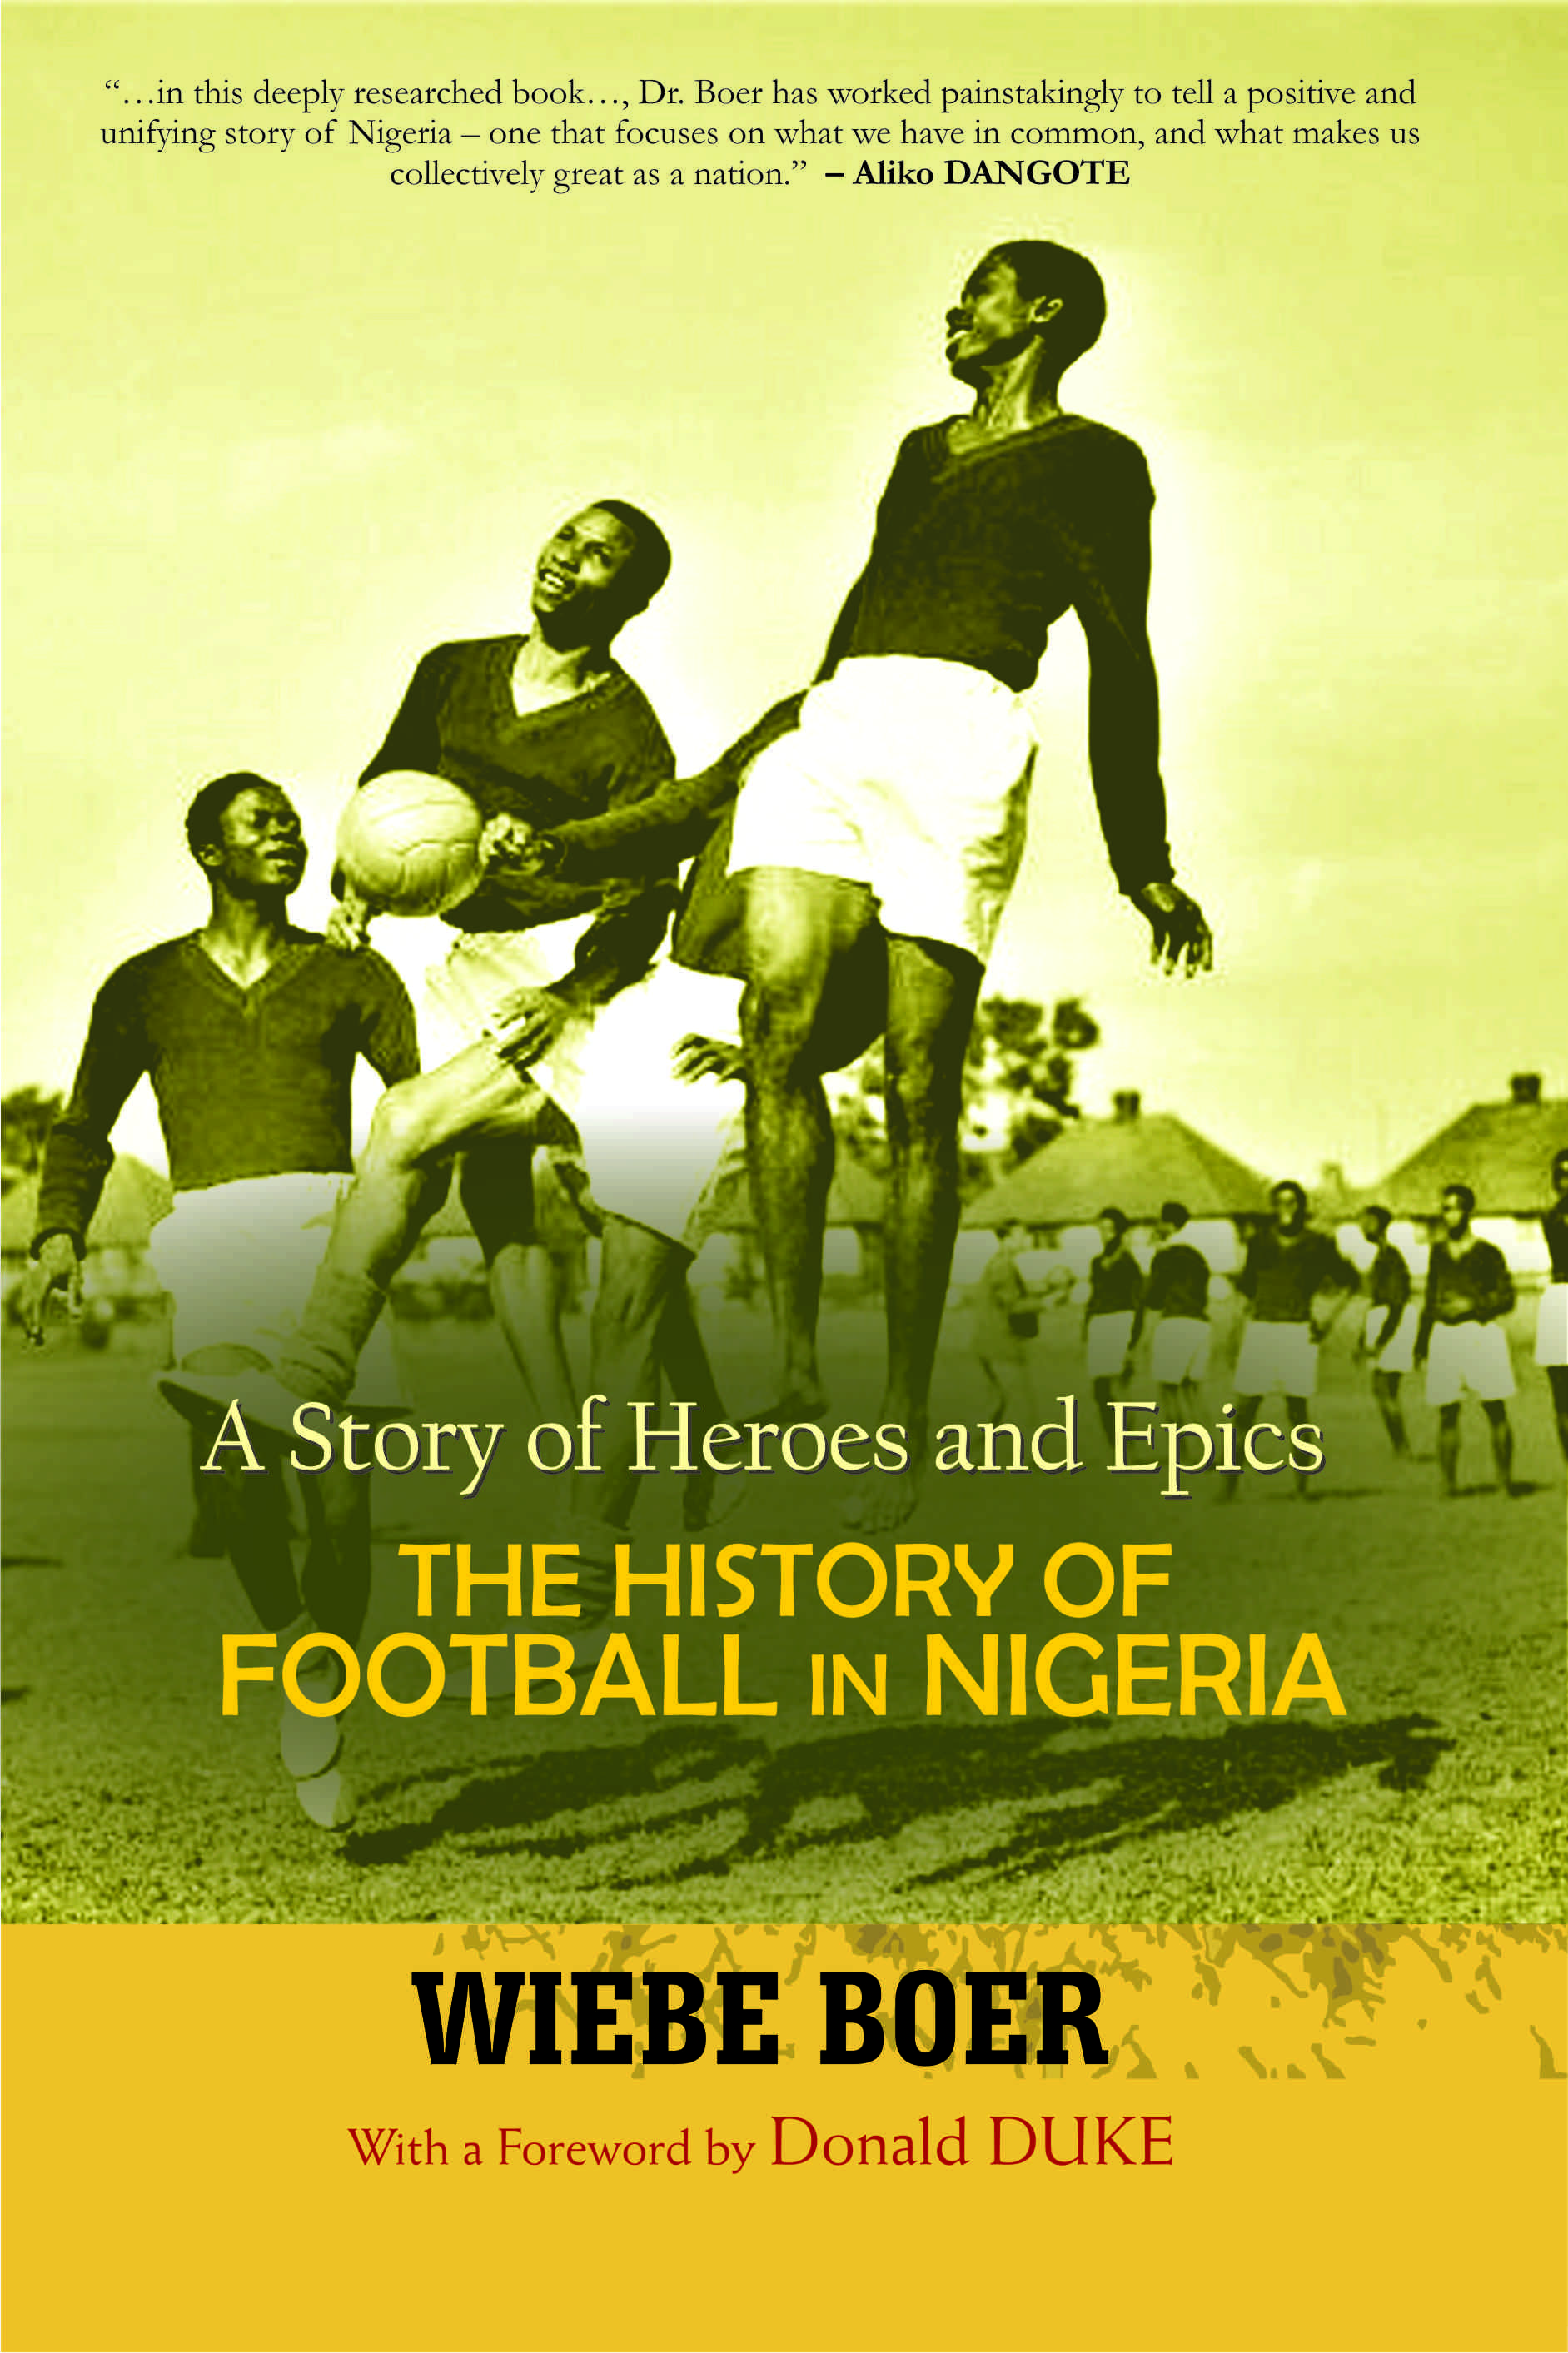 Book Review: His-Story of Nigerian Football By Ayodele Ibiyemi